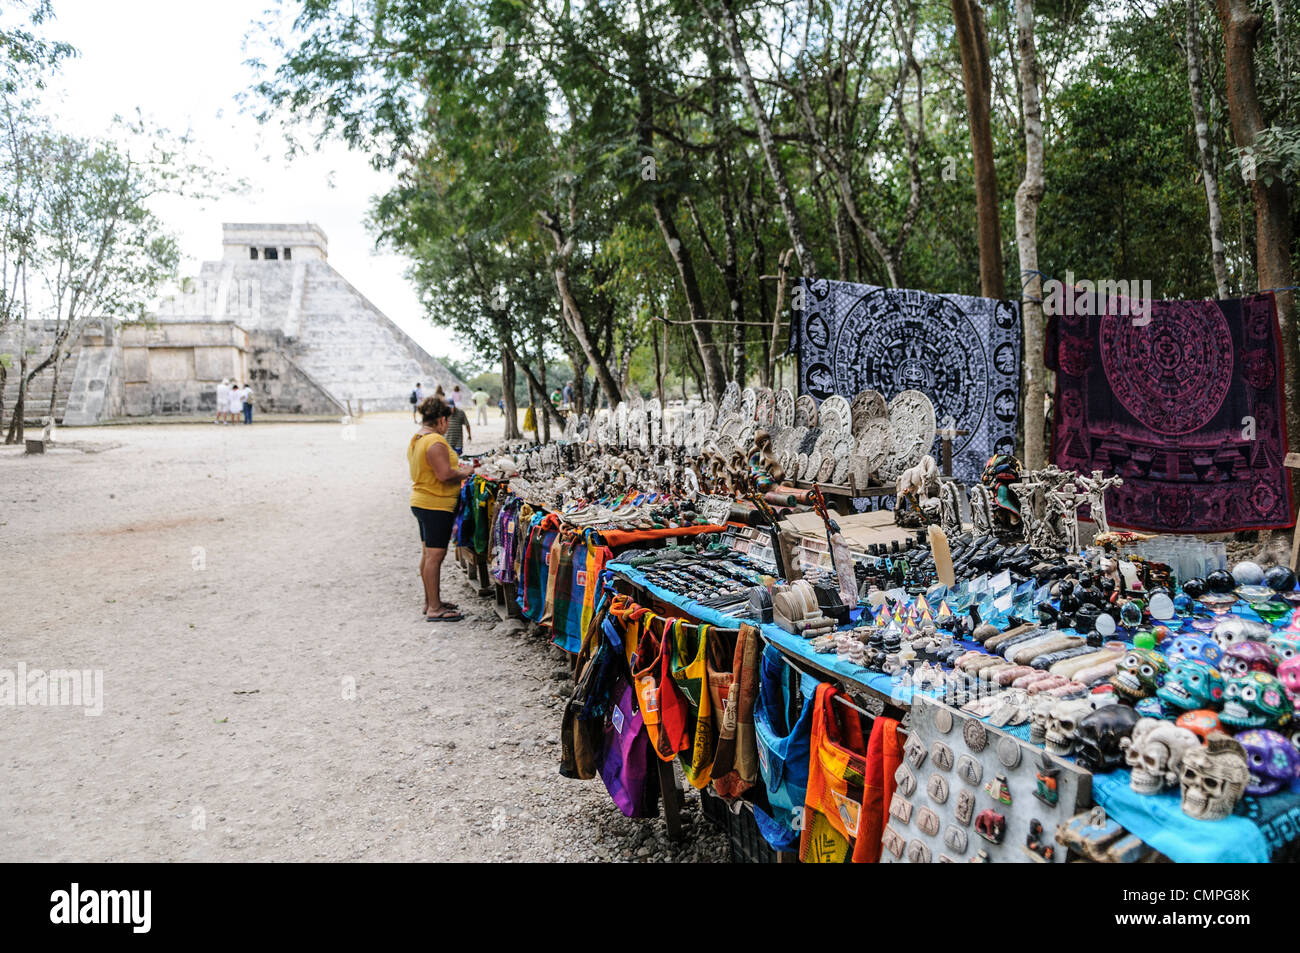 CHICHEN ITZA, Mexico - Market stalls selling local souvenirs and handicrafts to tourists visiting Chichen Itza Mayan ruins archeological site in Mexico. El Castilla is in the background. Stock Photo